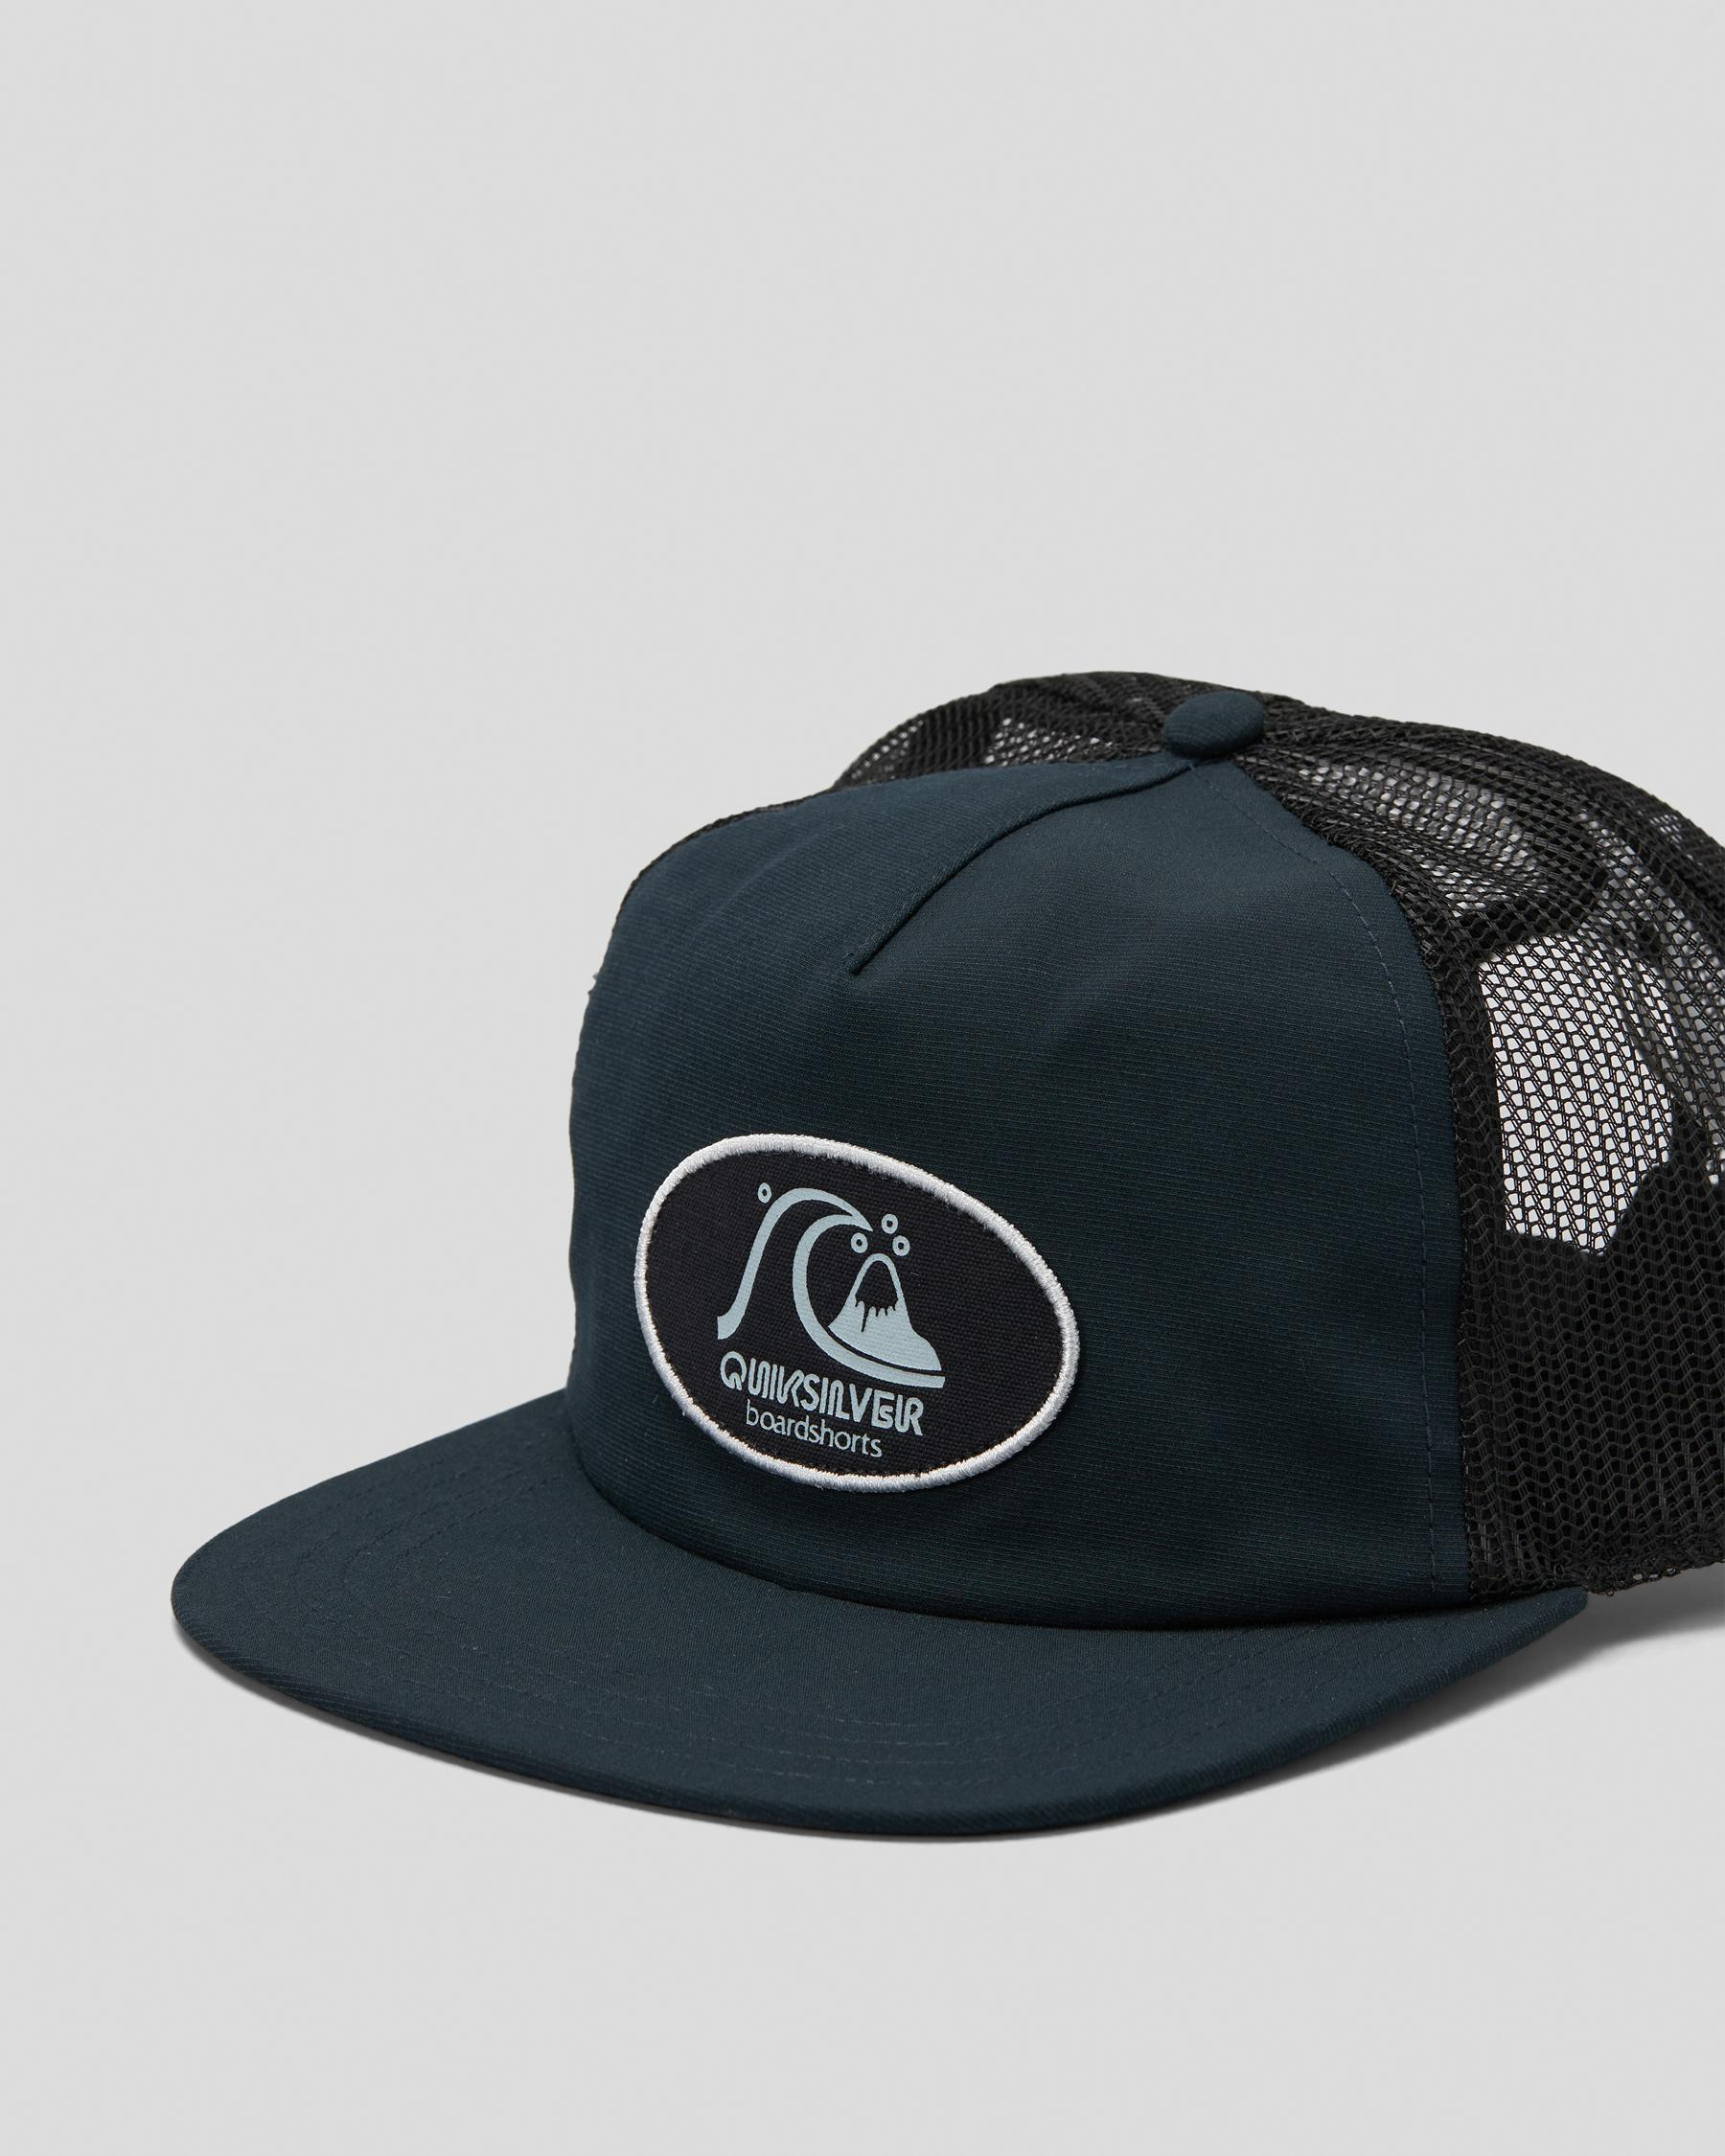 States Originals City Easy Quiksilver In United Returns - FREE* & Black Trucker Beach - Shipping